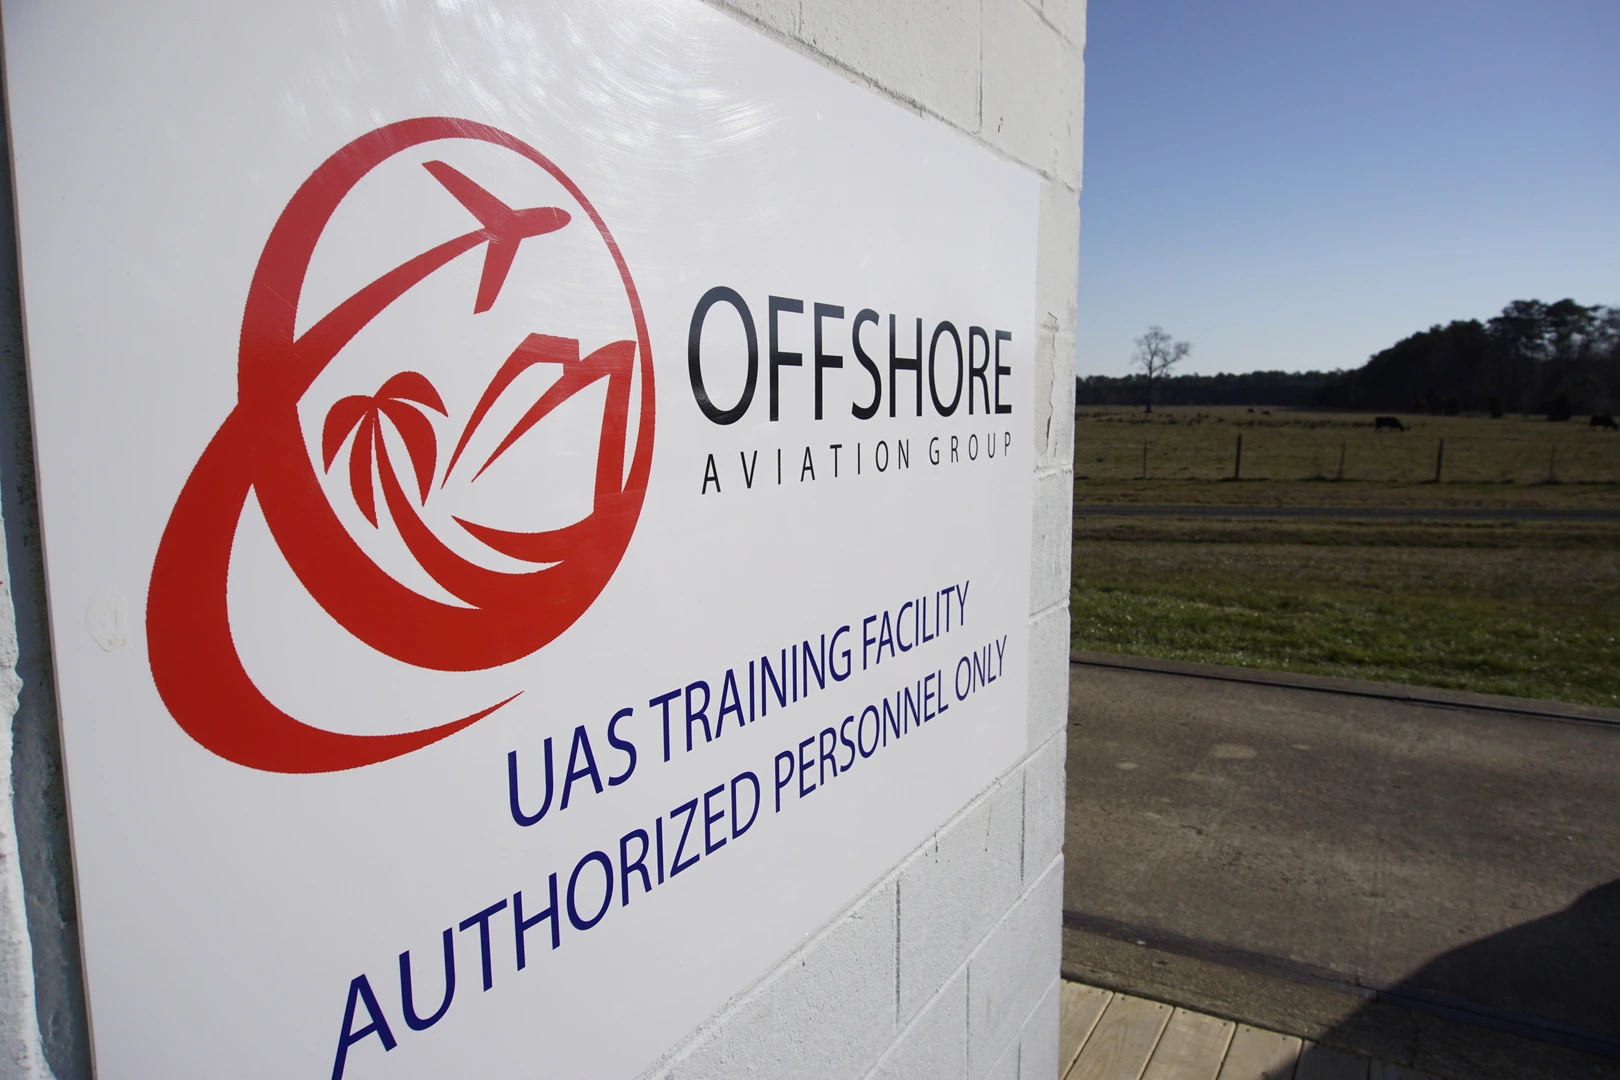 Offshore Training Facility